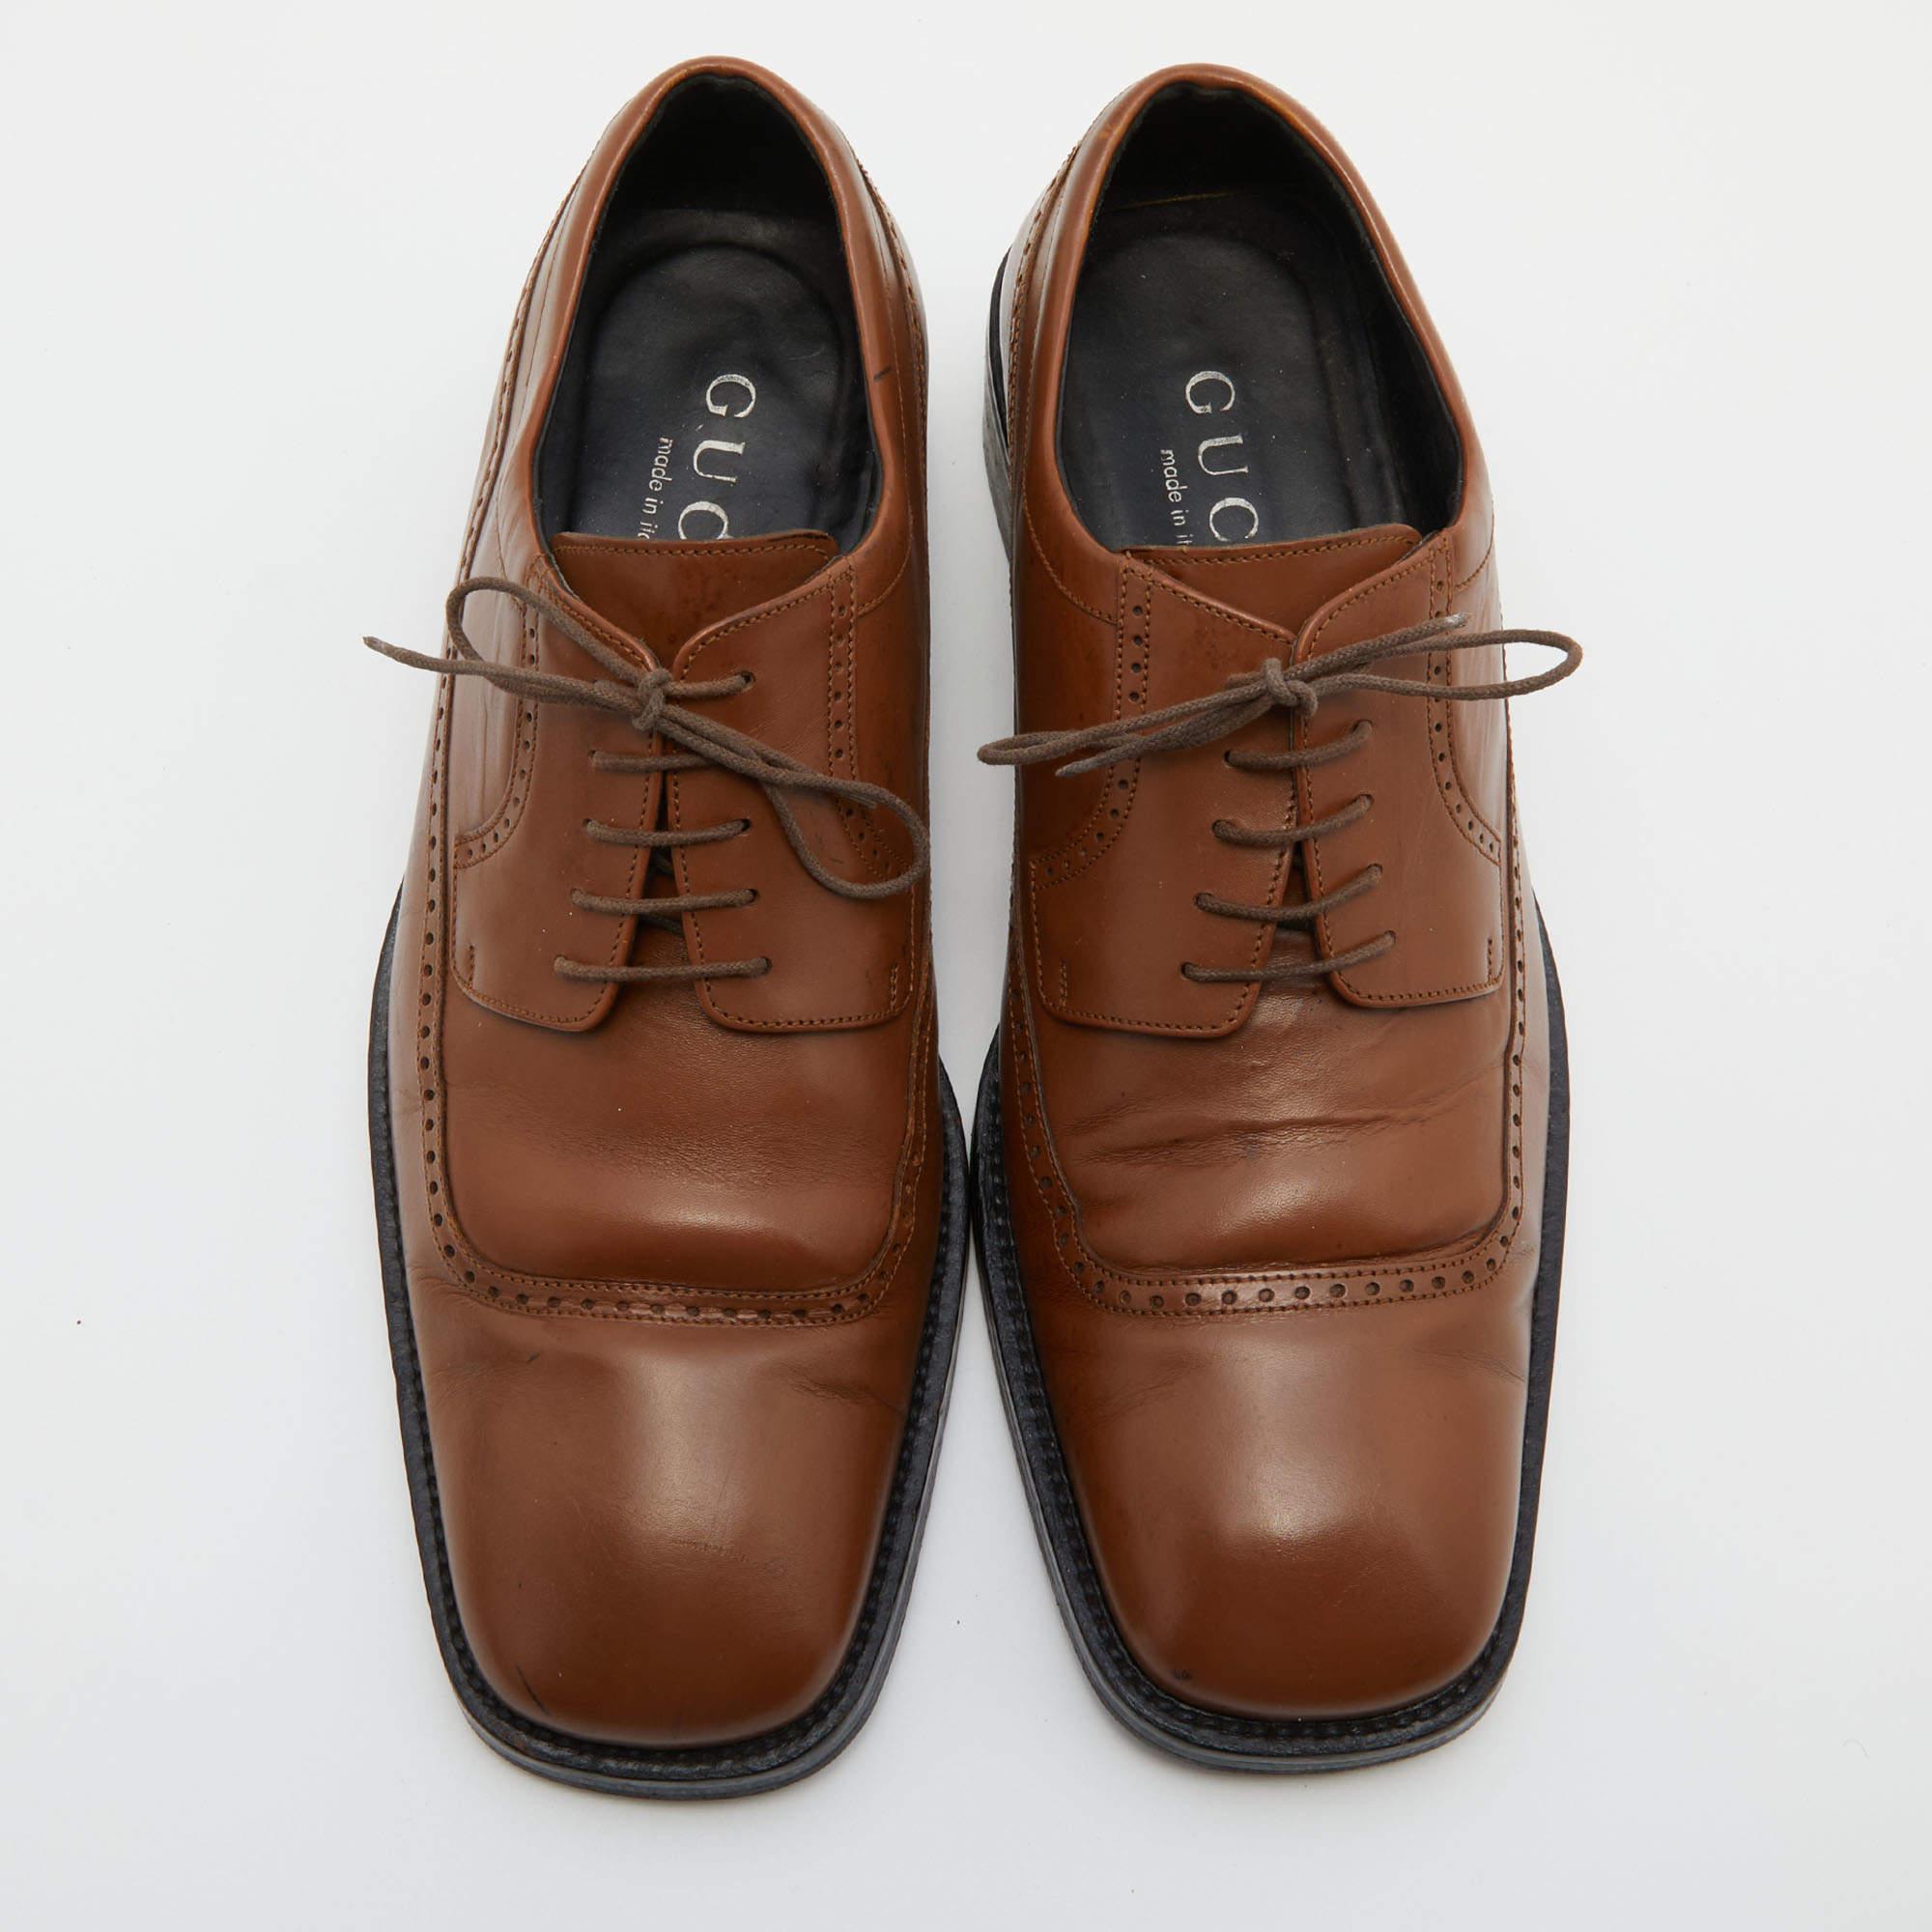 Practical, fashionable, and durable—these designer shoes are carefully built to be fine companions to your everyday style. They come made using the best materials to be a prized buy.

